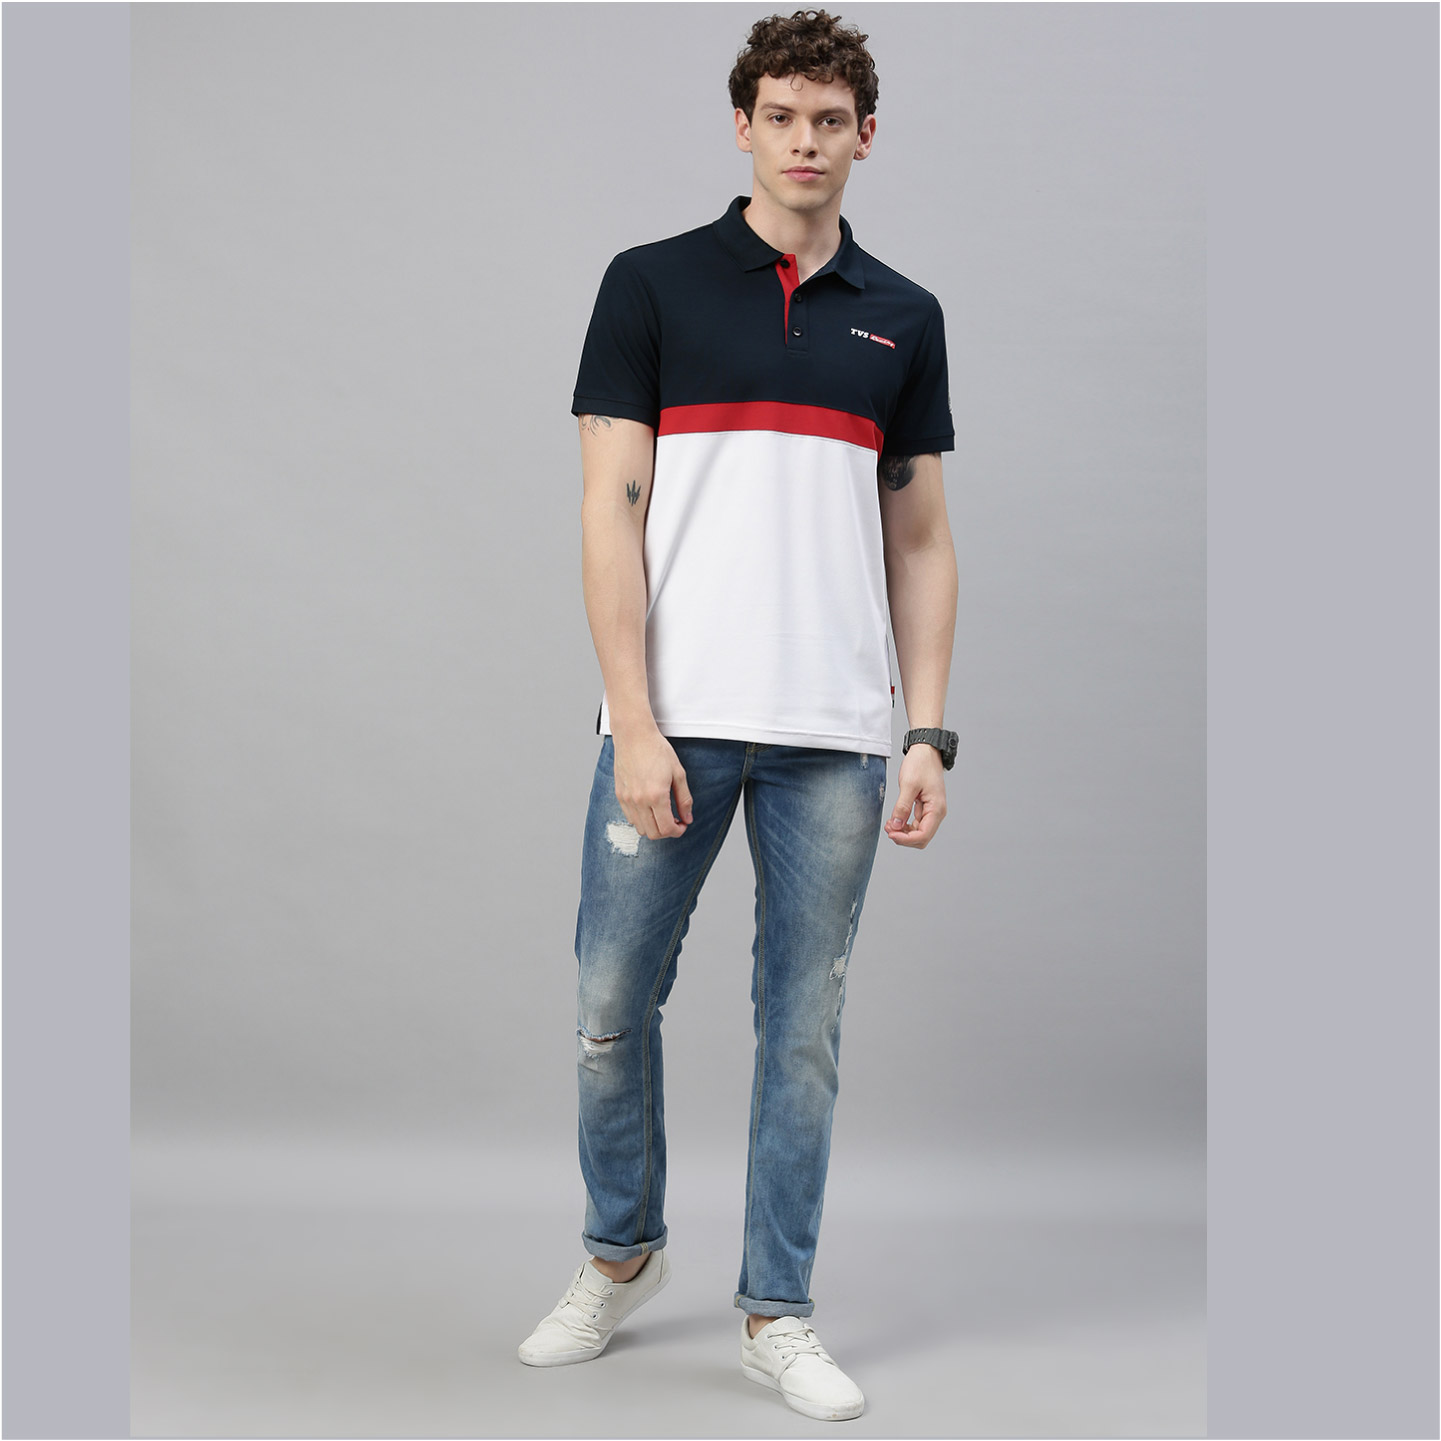  TVS Racing Polo T Shirt Polyester (Solid Red)